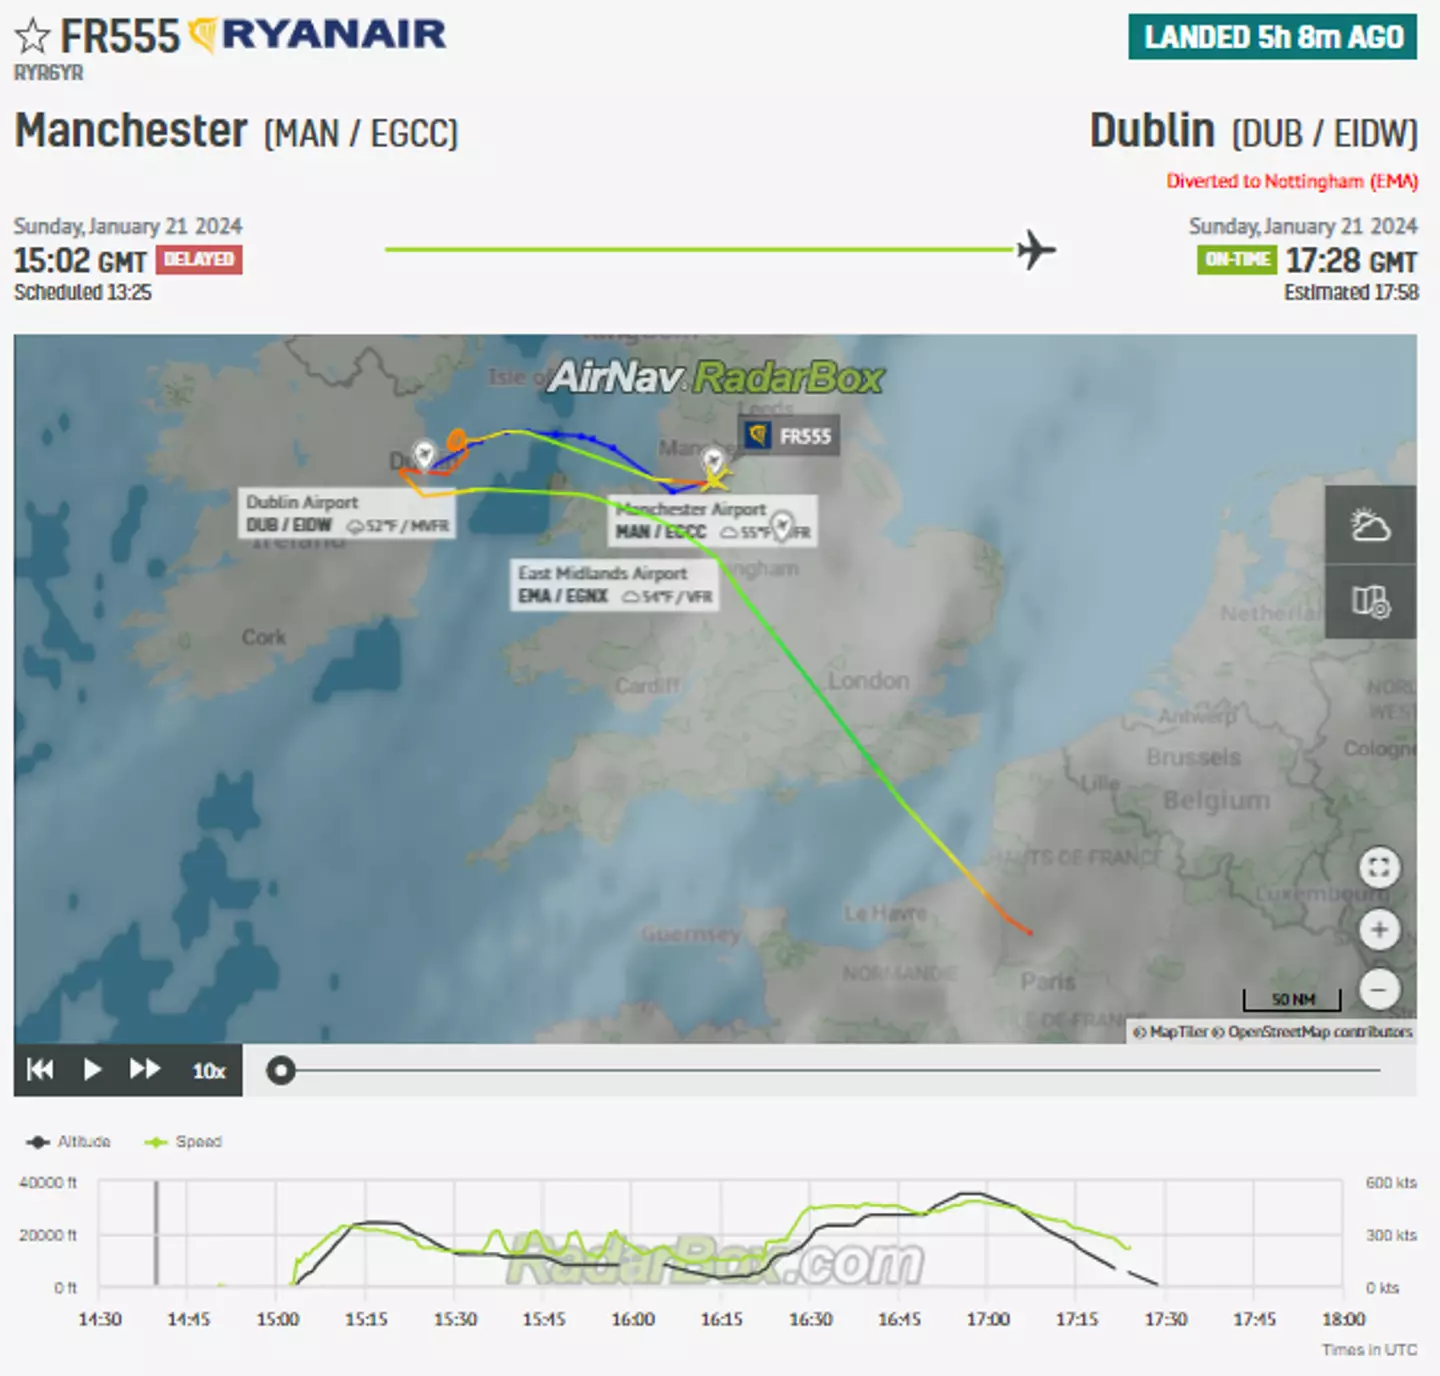 As Storm Isha batters the UK with 90mph winds in places, it seems that the plane was unable to land safely in Dublin.